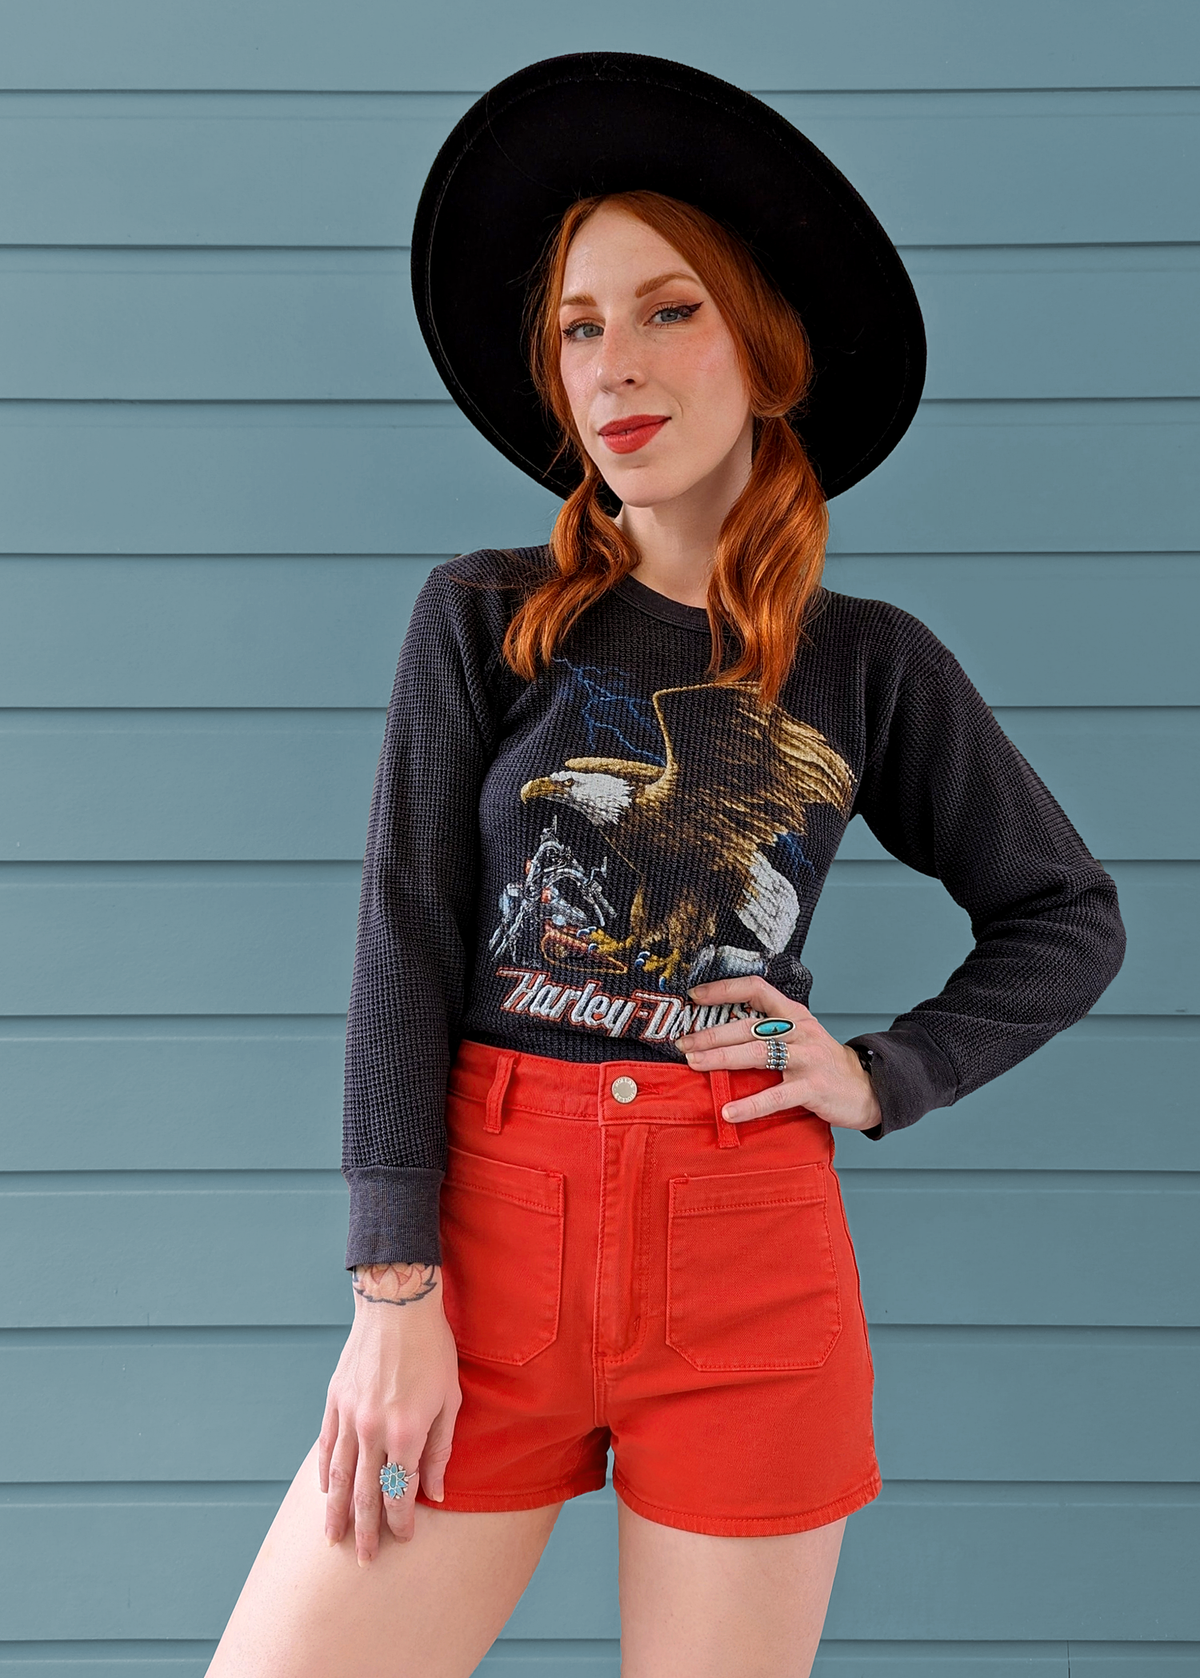 70s inspired Blood Orange Red high rise waist Sailor Patch Front Pocket Stretch Cotton Denim Shorts by Rolla's Jeans